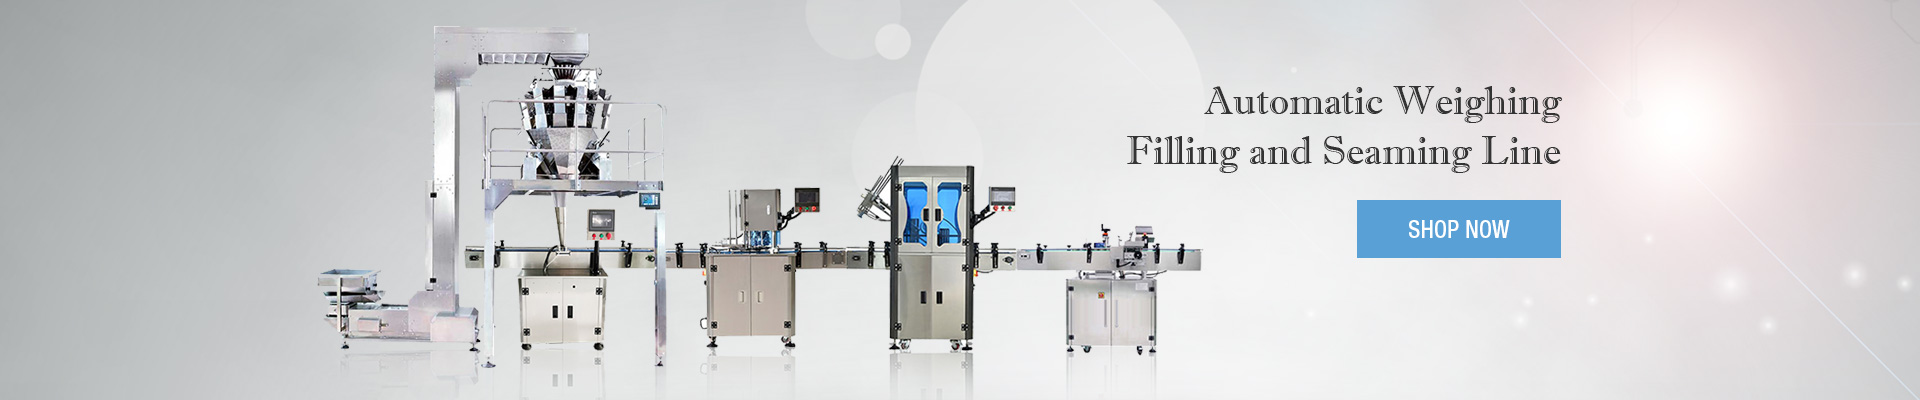 Automatic Weighing Filling and Seaming Line